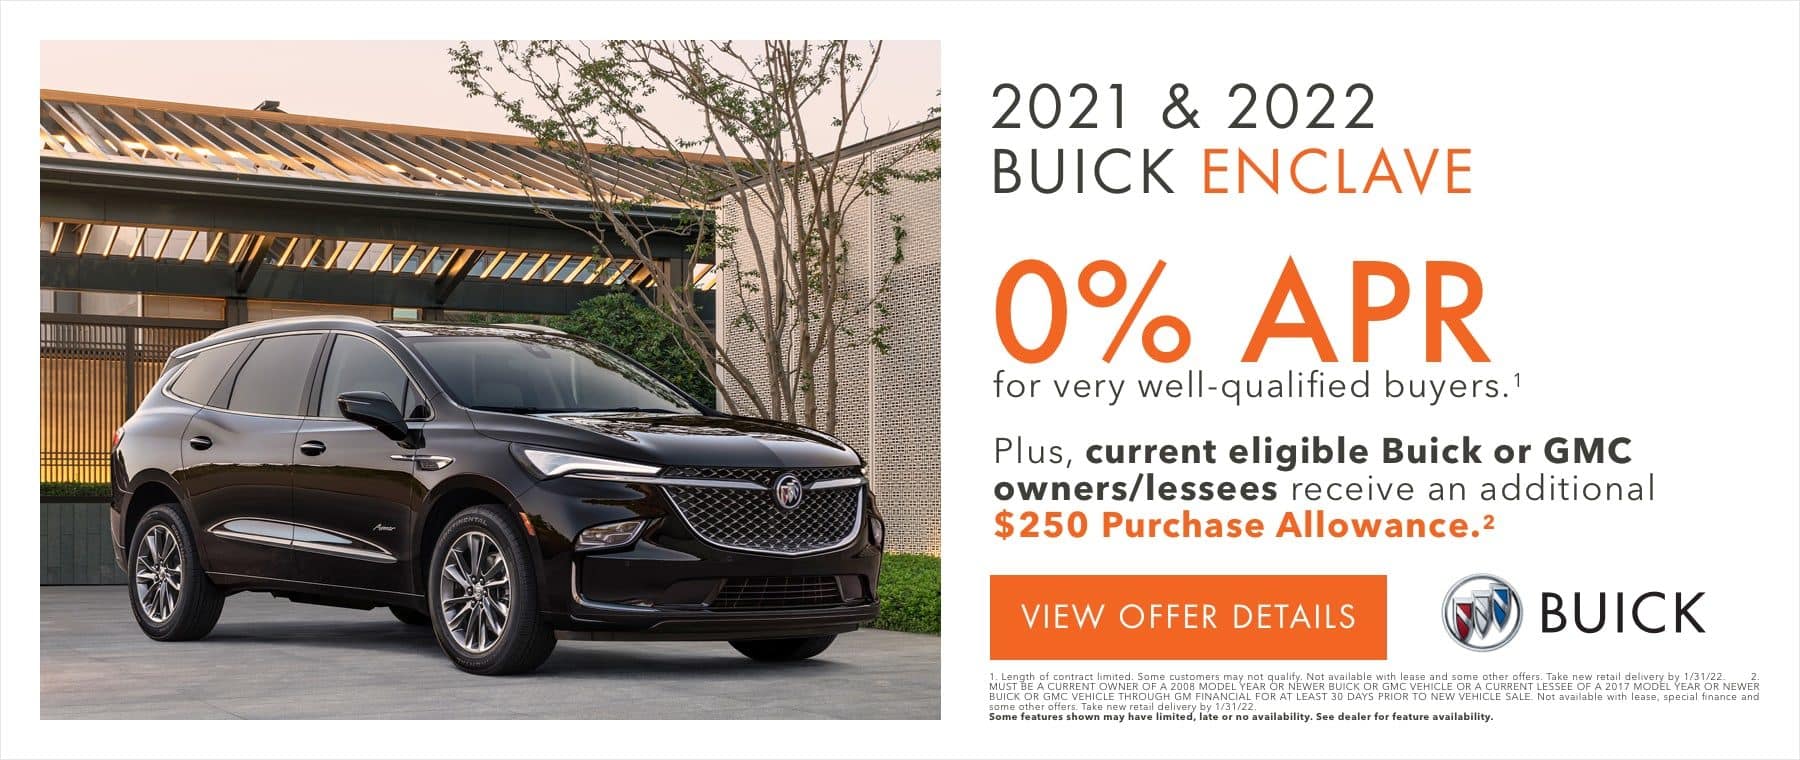 0% APR for very well-qualified buyers.1 Plus, current eligible Buick or GMC owners/lessees receive an additional $250 Purchase Allowance.2